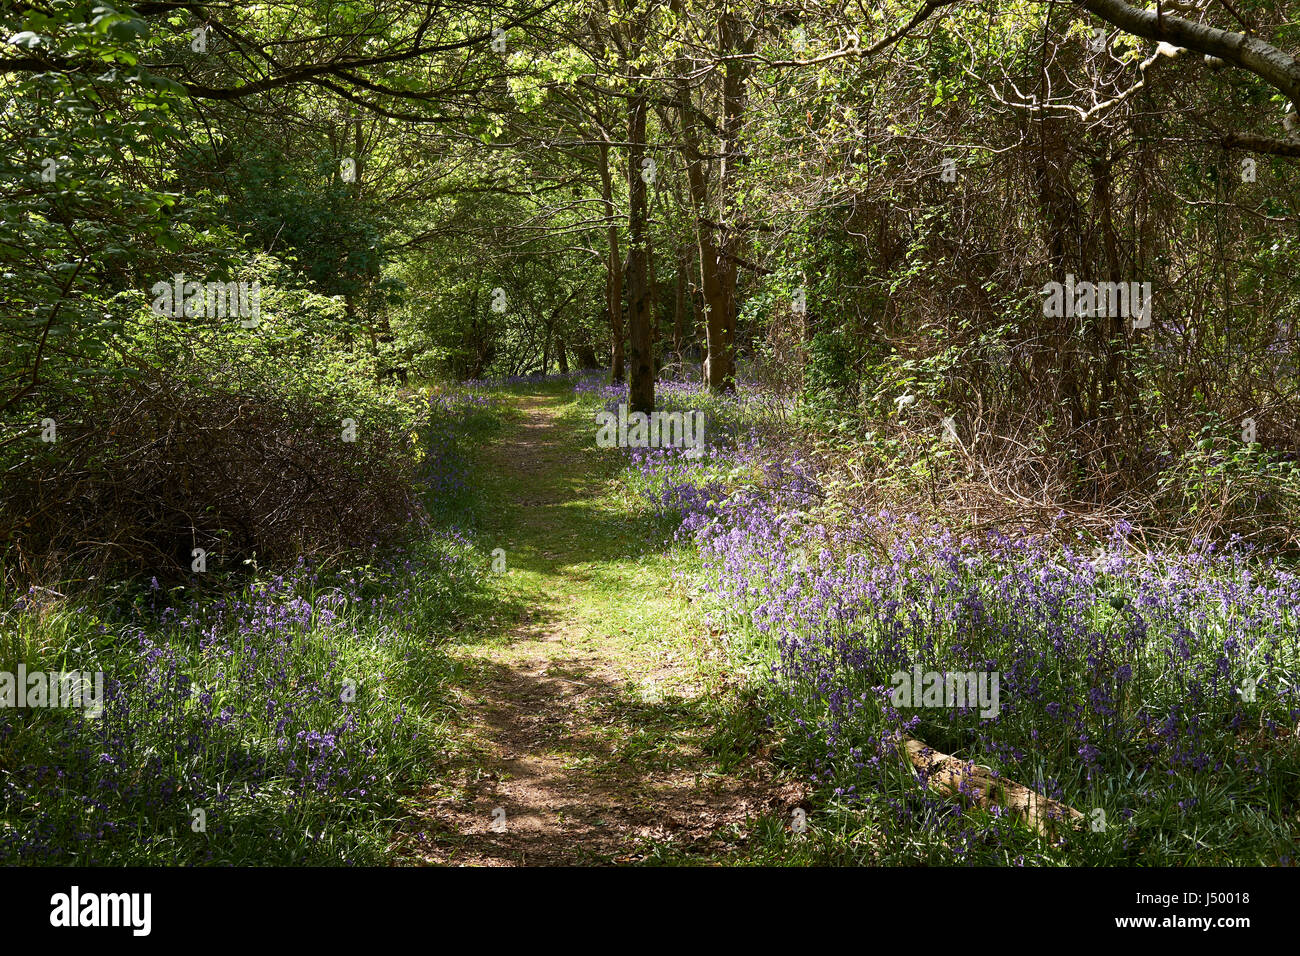 A footpath through ancient English woodland carpeted with spring Bluebells (Hyacinthoides non-scripta), UK. Stock Photo